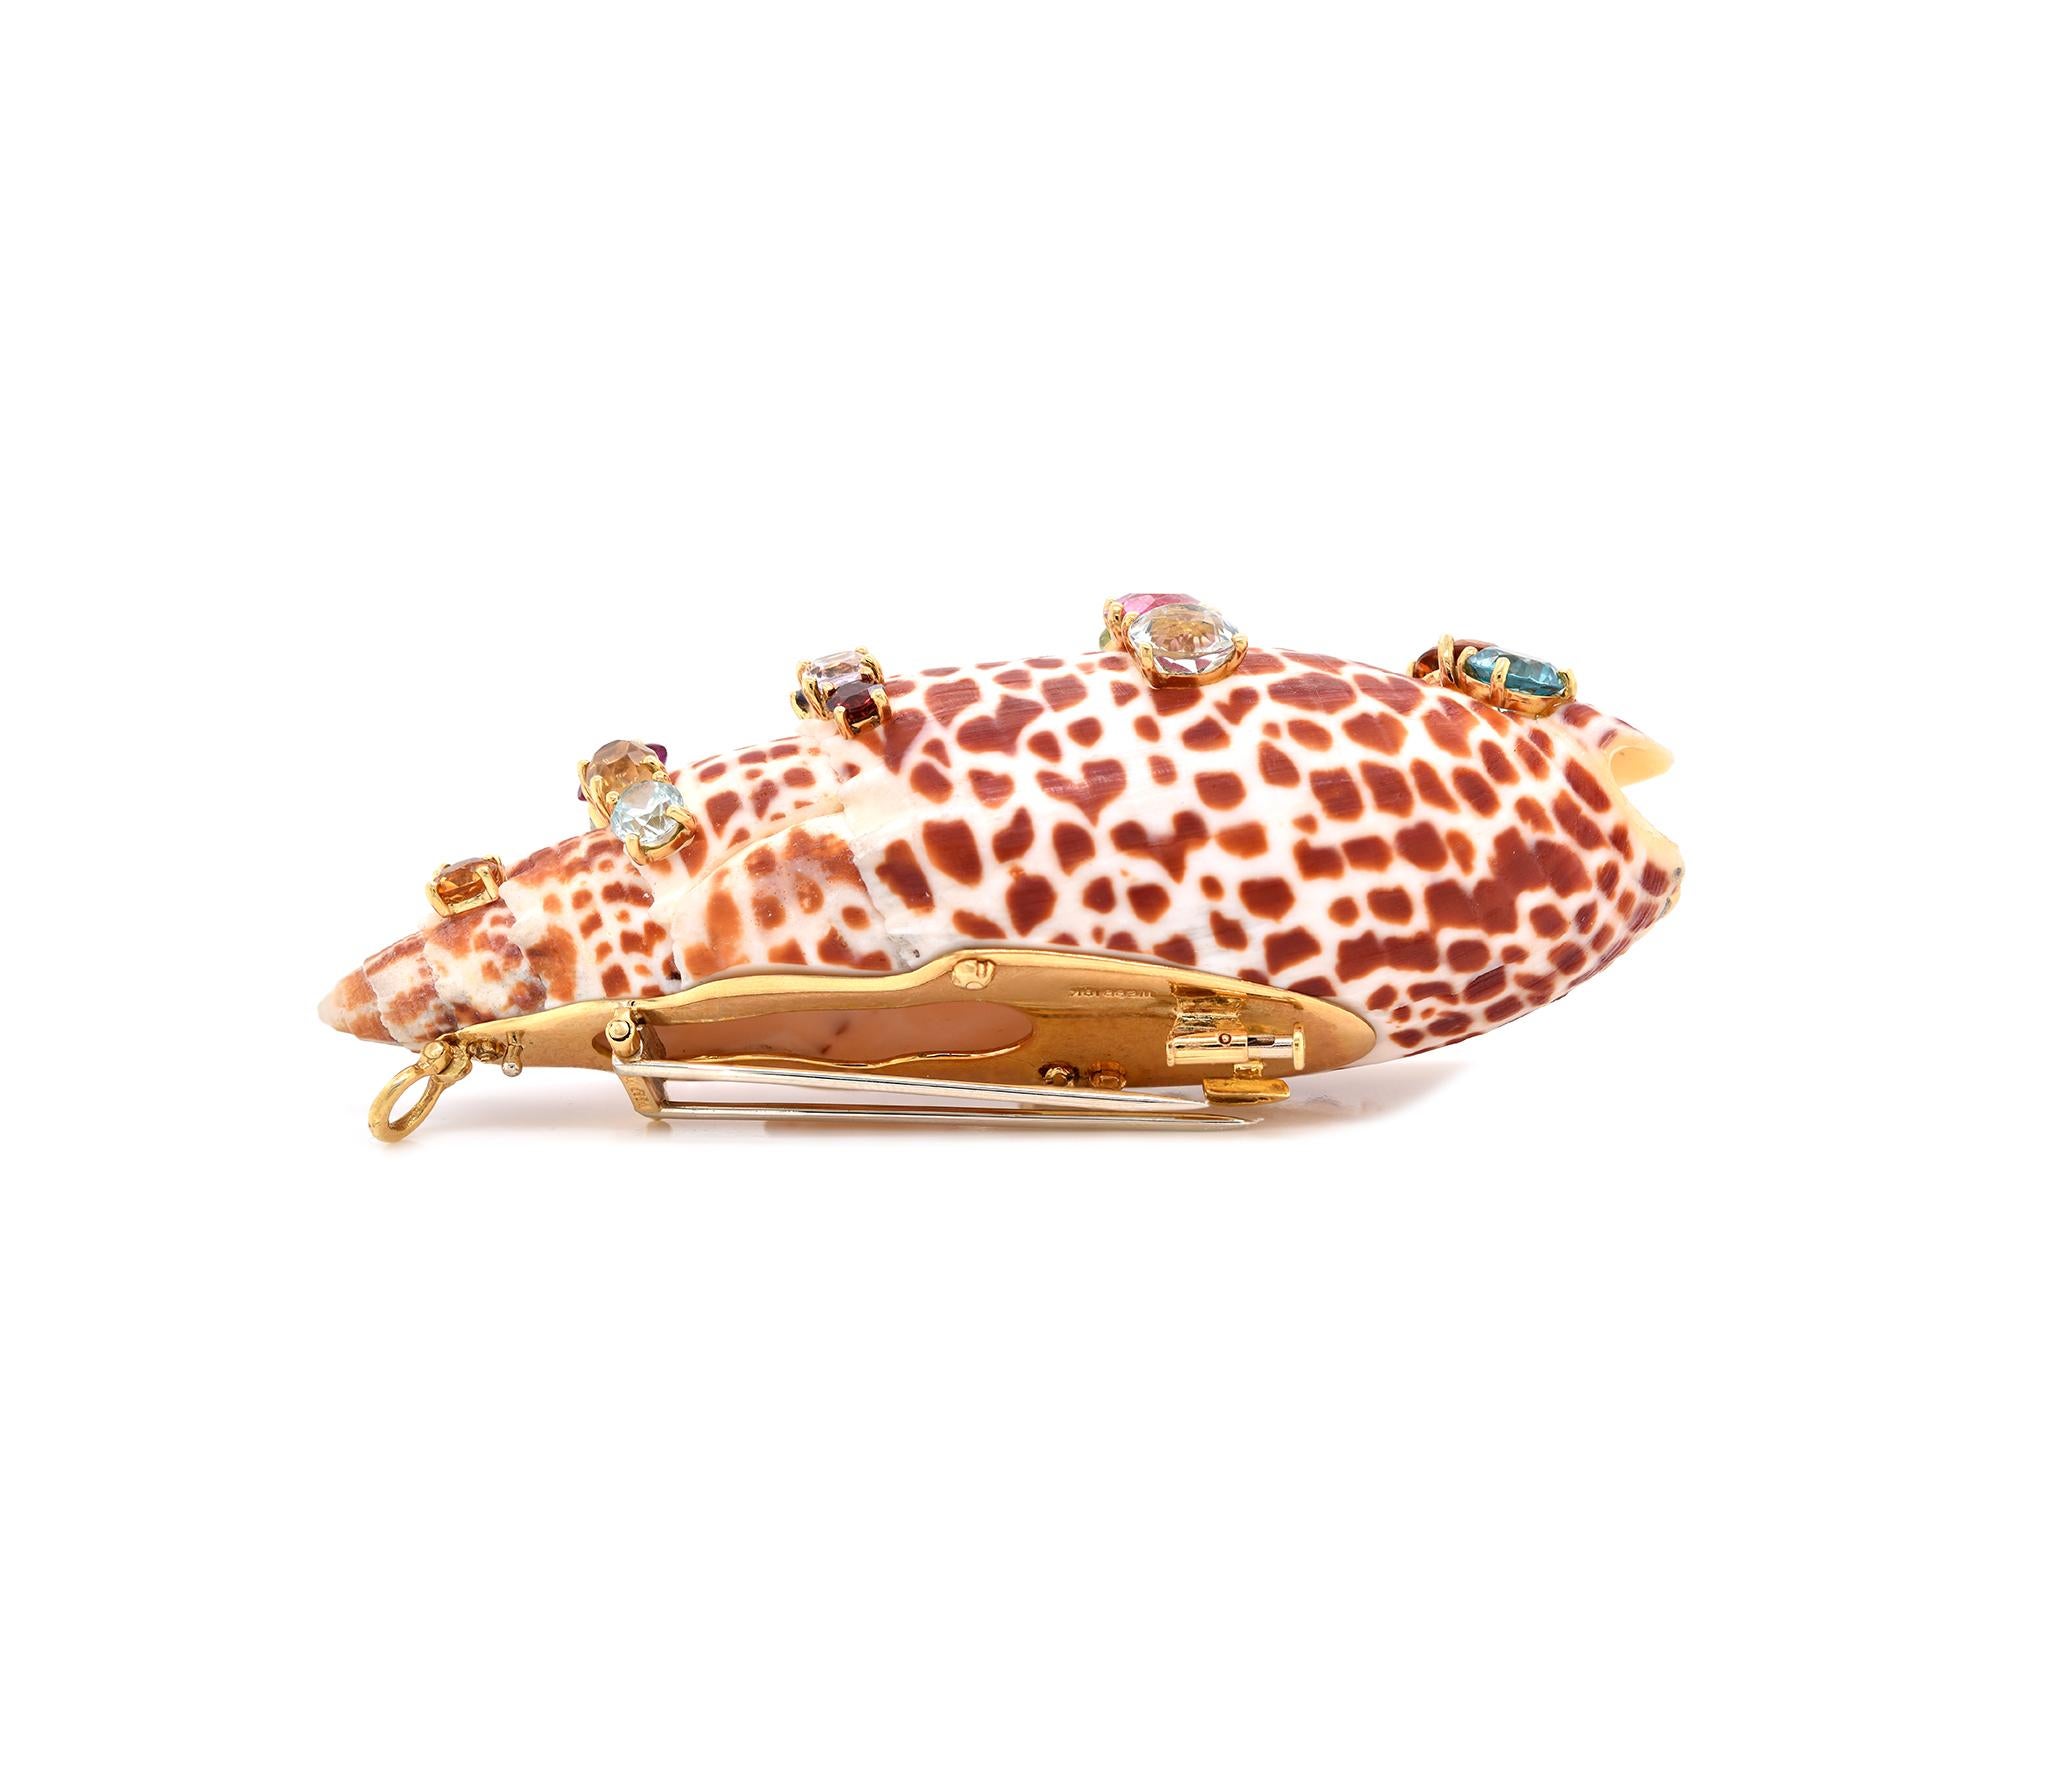 Designer: David Webb
Material: 18K yellow gold / Conch shell
Weight: 79.53 grams
Measurement: shell measures 95 X 37mm
